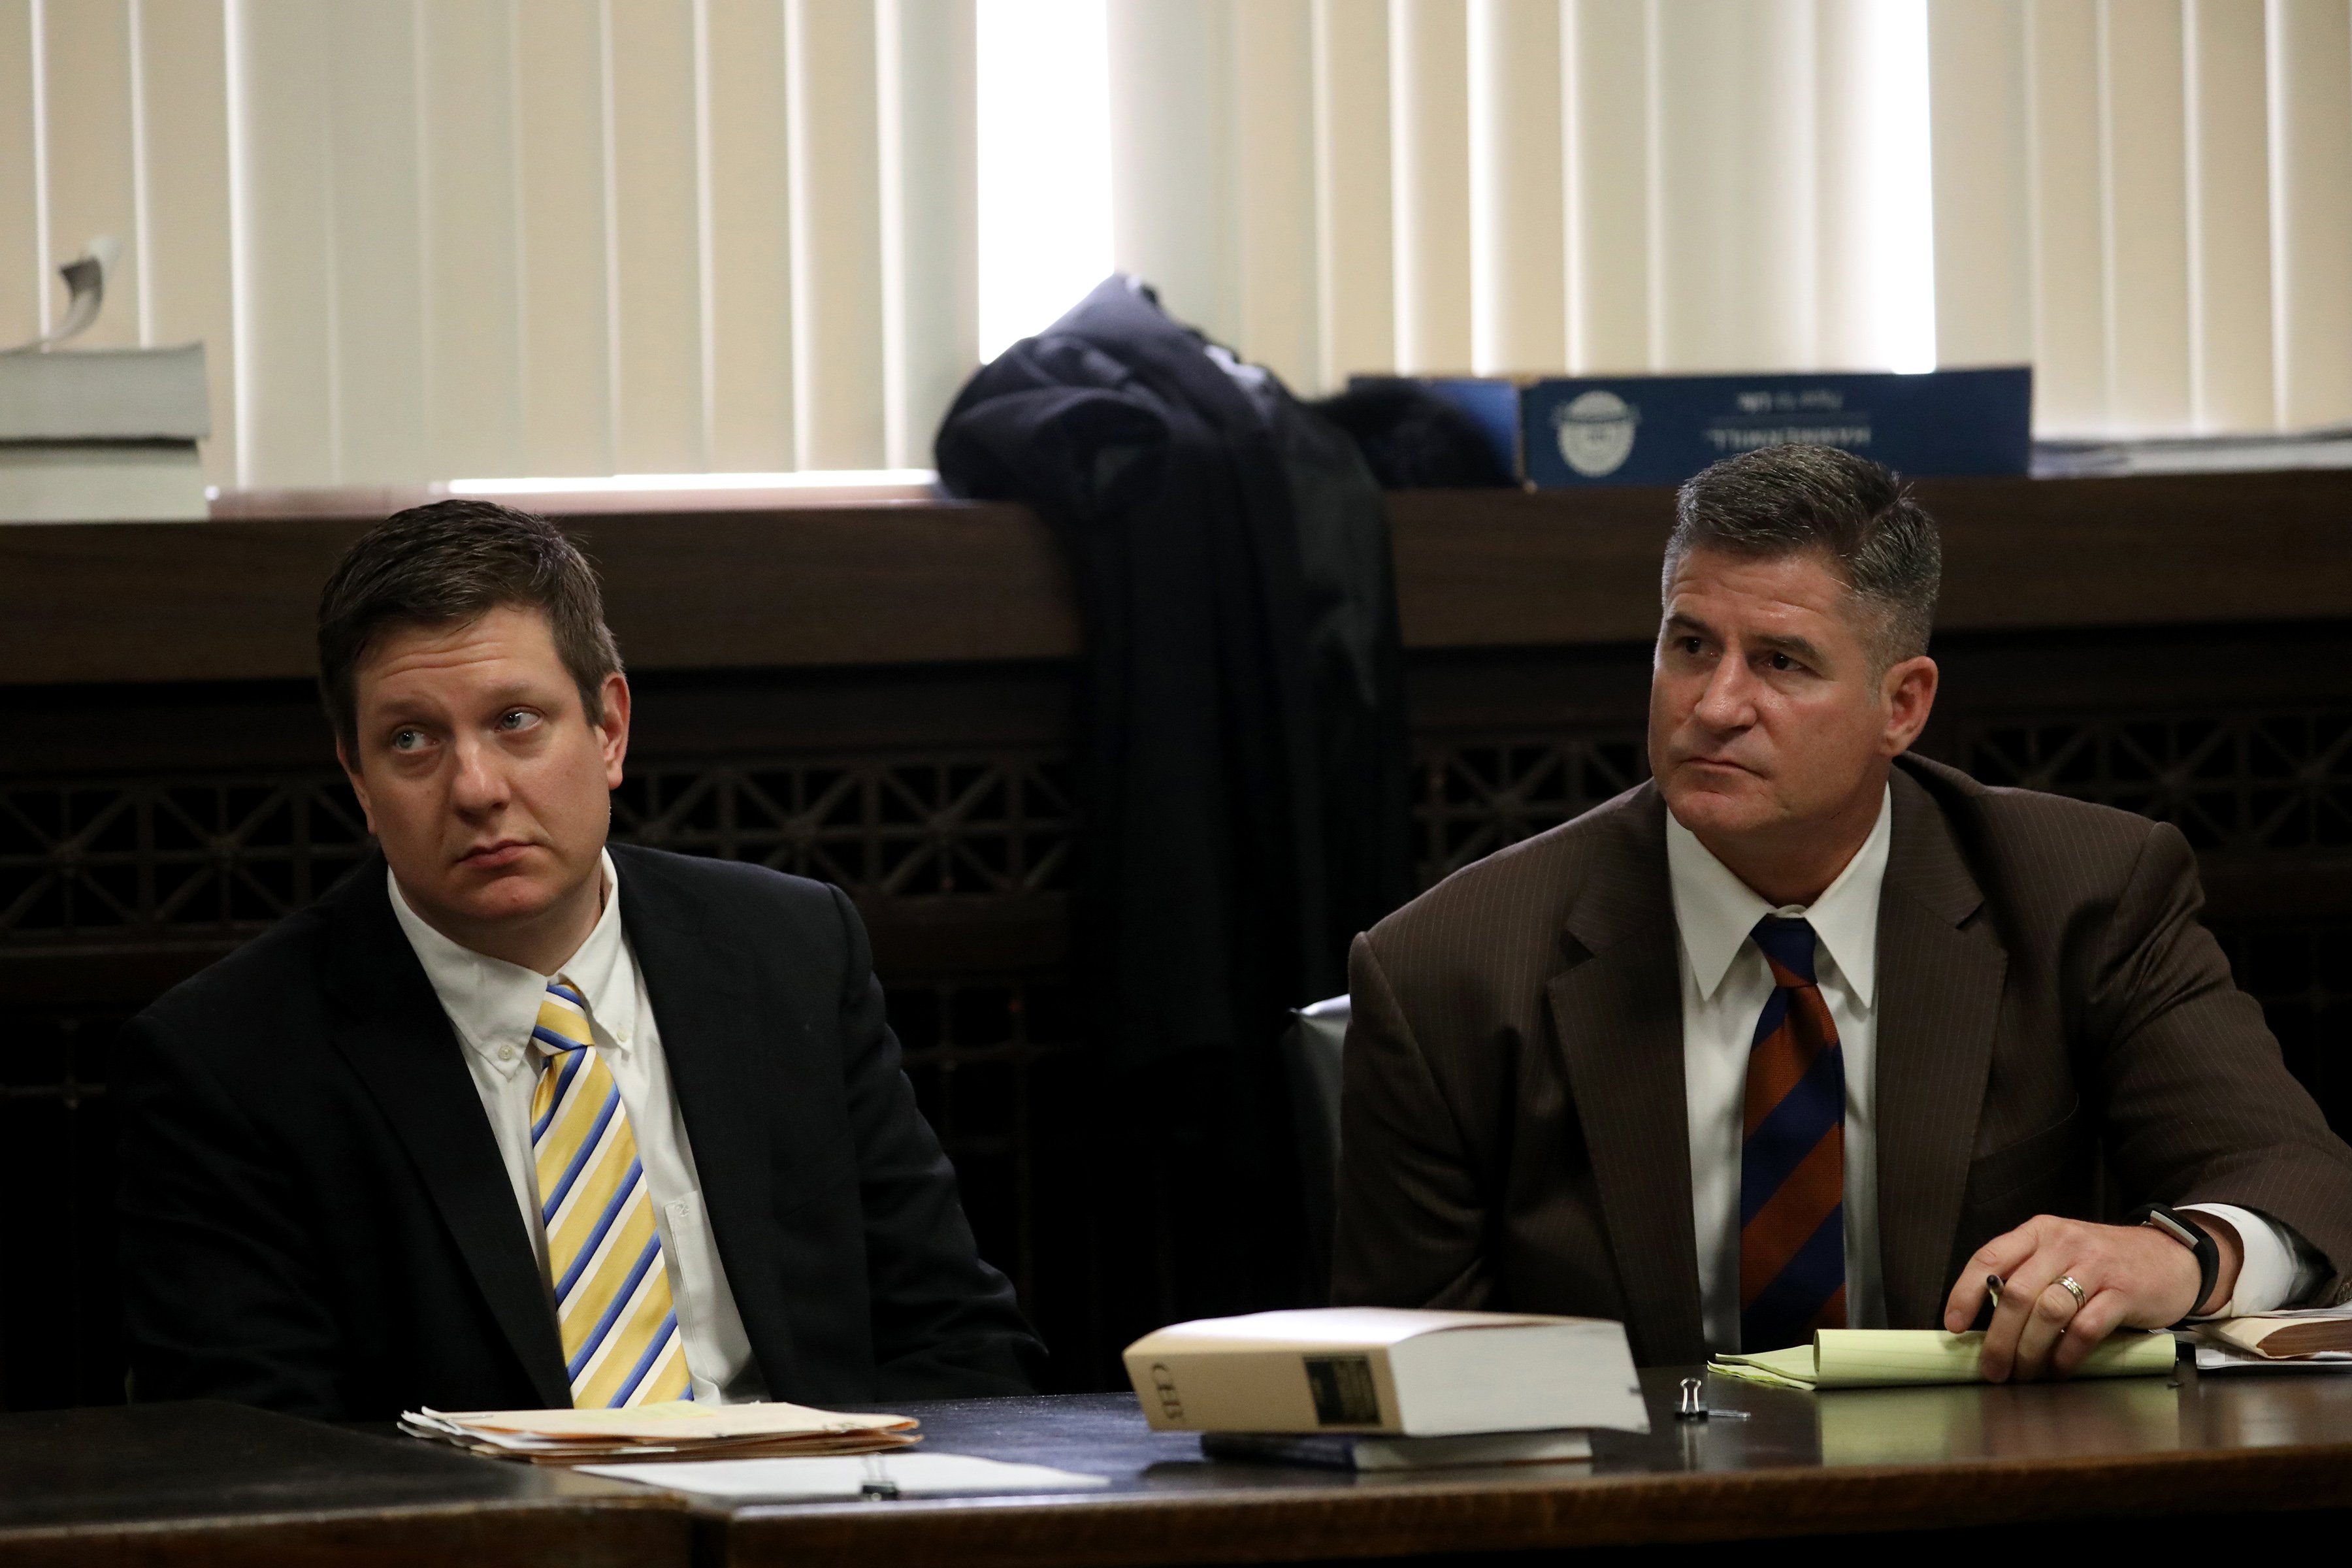 Jason Van Dyke, left, sits with his attorney Daniel Herbert at his hearing at Leighton Criminal Court in Chicago on April 18, 2018. (Nancy Stone / Chicago Tribune / Pool)